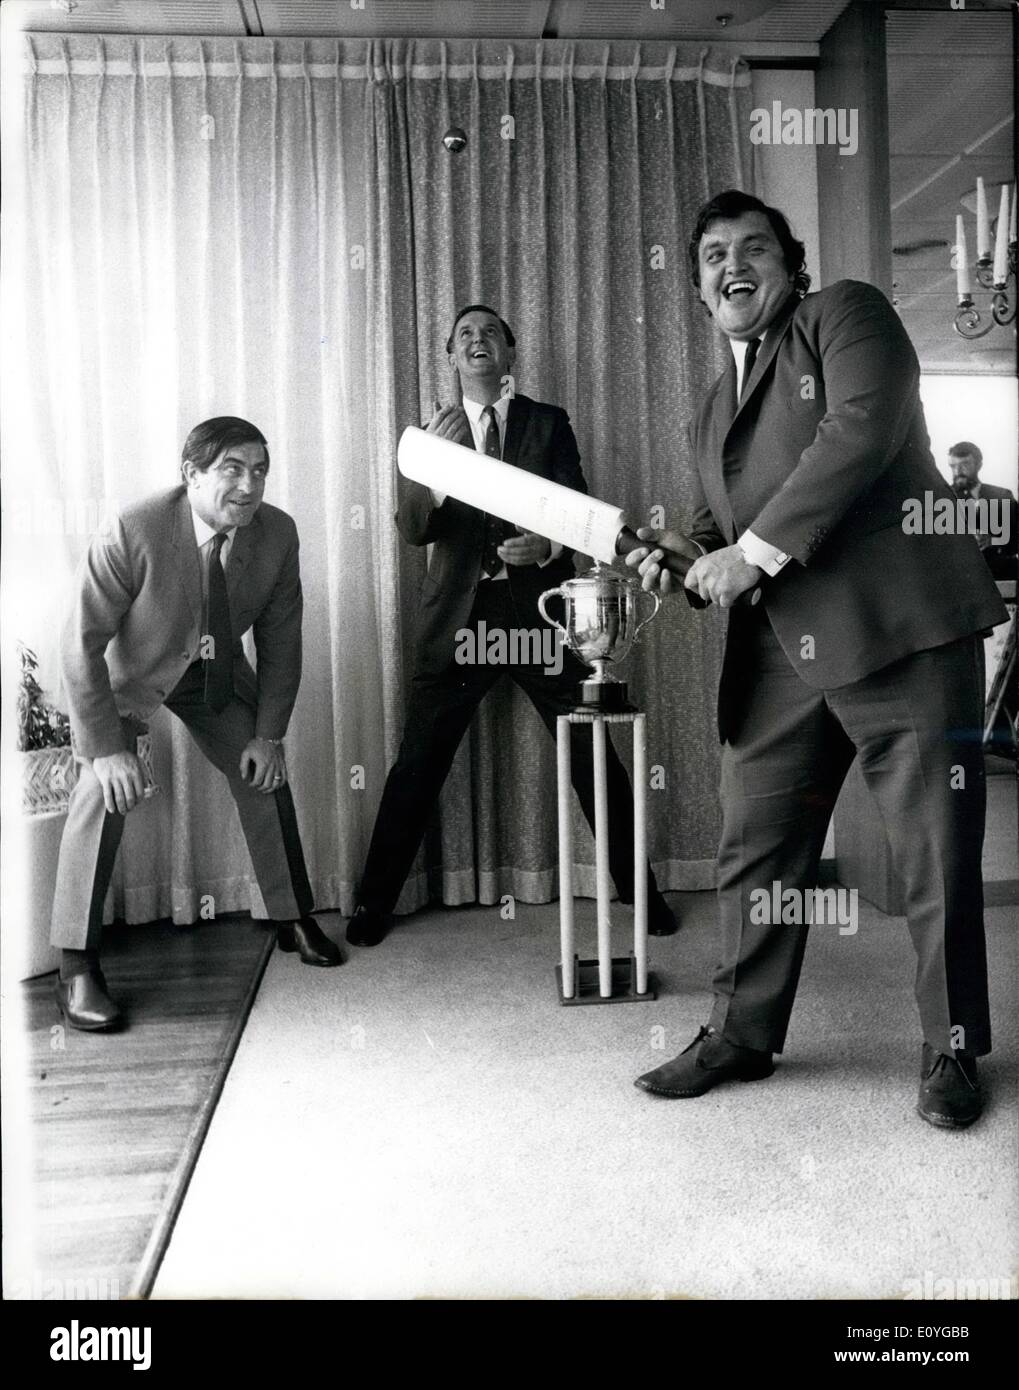 Apr. 04, 1970 - Milburn returns to the wicket and notches up a trophy. Defending the Lawrence Trophy yesterday, Colin Milburn, 28, former Northants opening batsman, after he had been presented with the cup and a &pound;250 cheque for scoring the fastest test century in 1969. He made it off 163 deliveries against Pakistan in Karachi in March. Tom Graveney, the previous holder, who kept wicket with Freddie Truman at first slip at New Zealand House, London, said that everyone was deeply sorry that Milburn was unlikely to be seen in the middle again Stock Photo